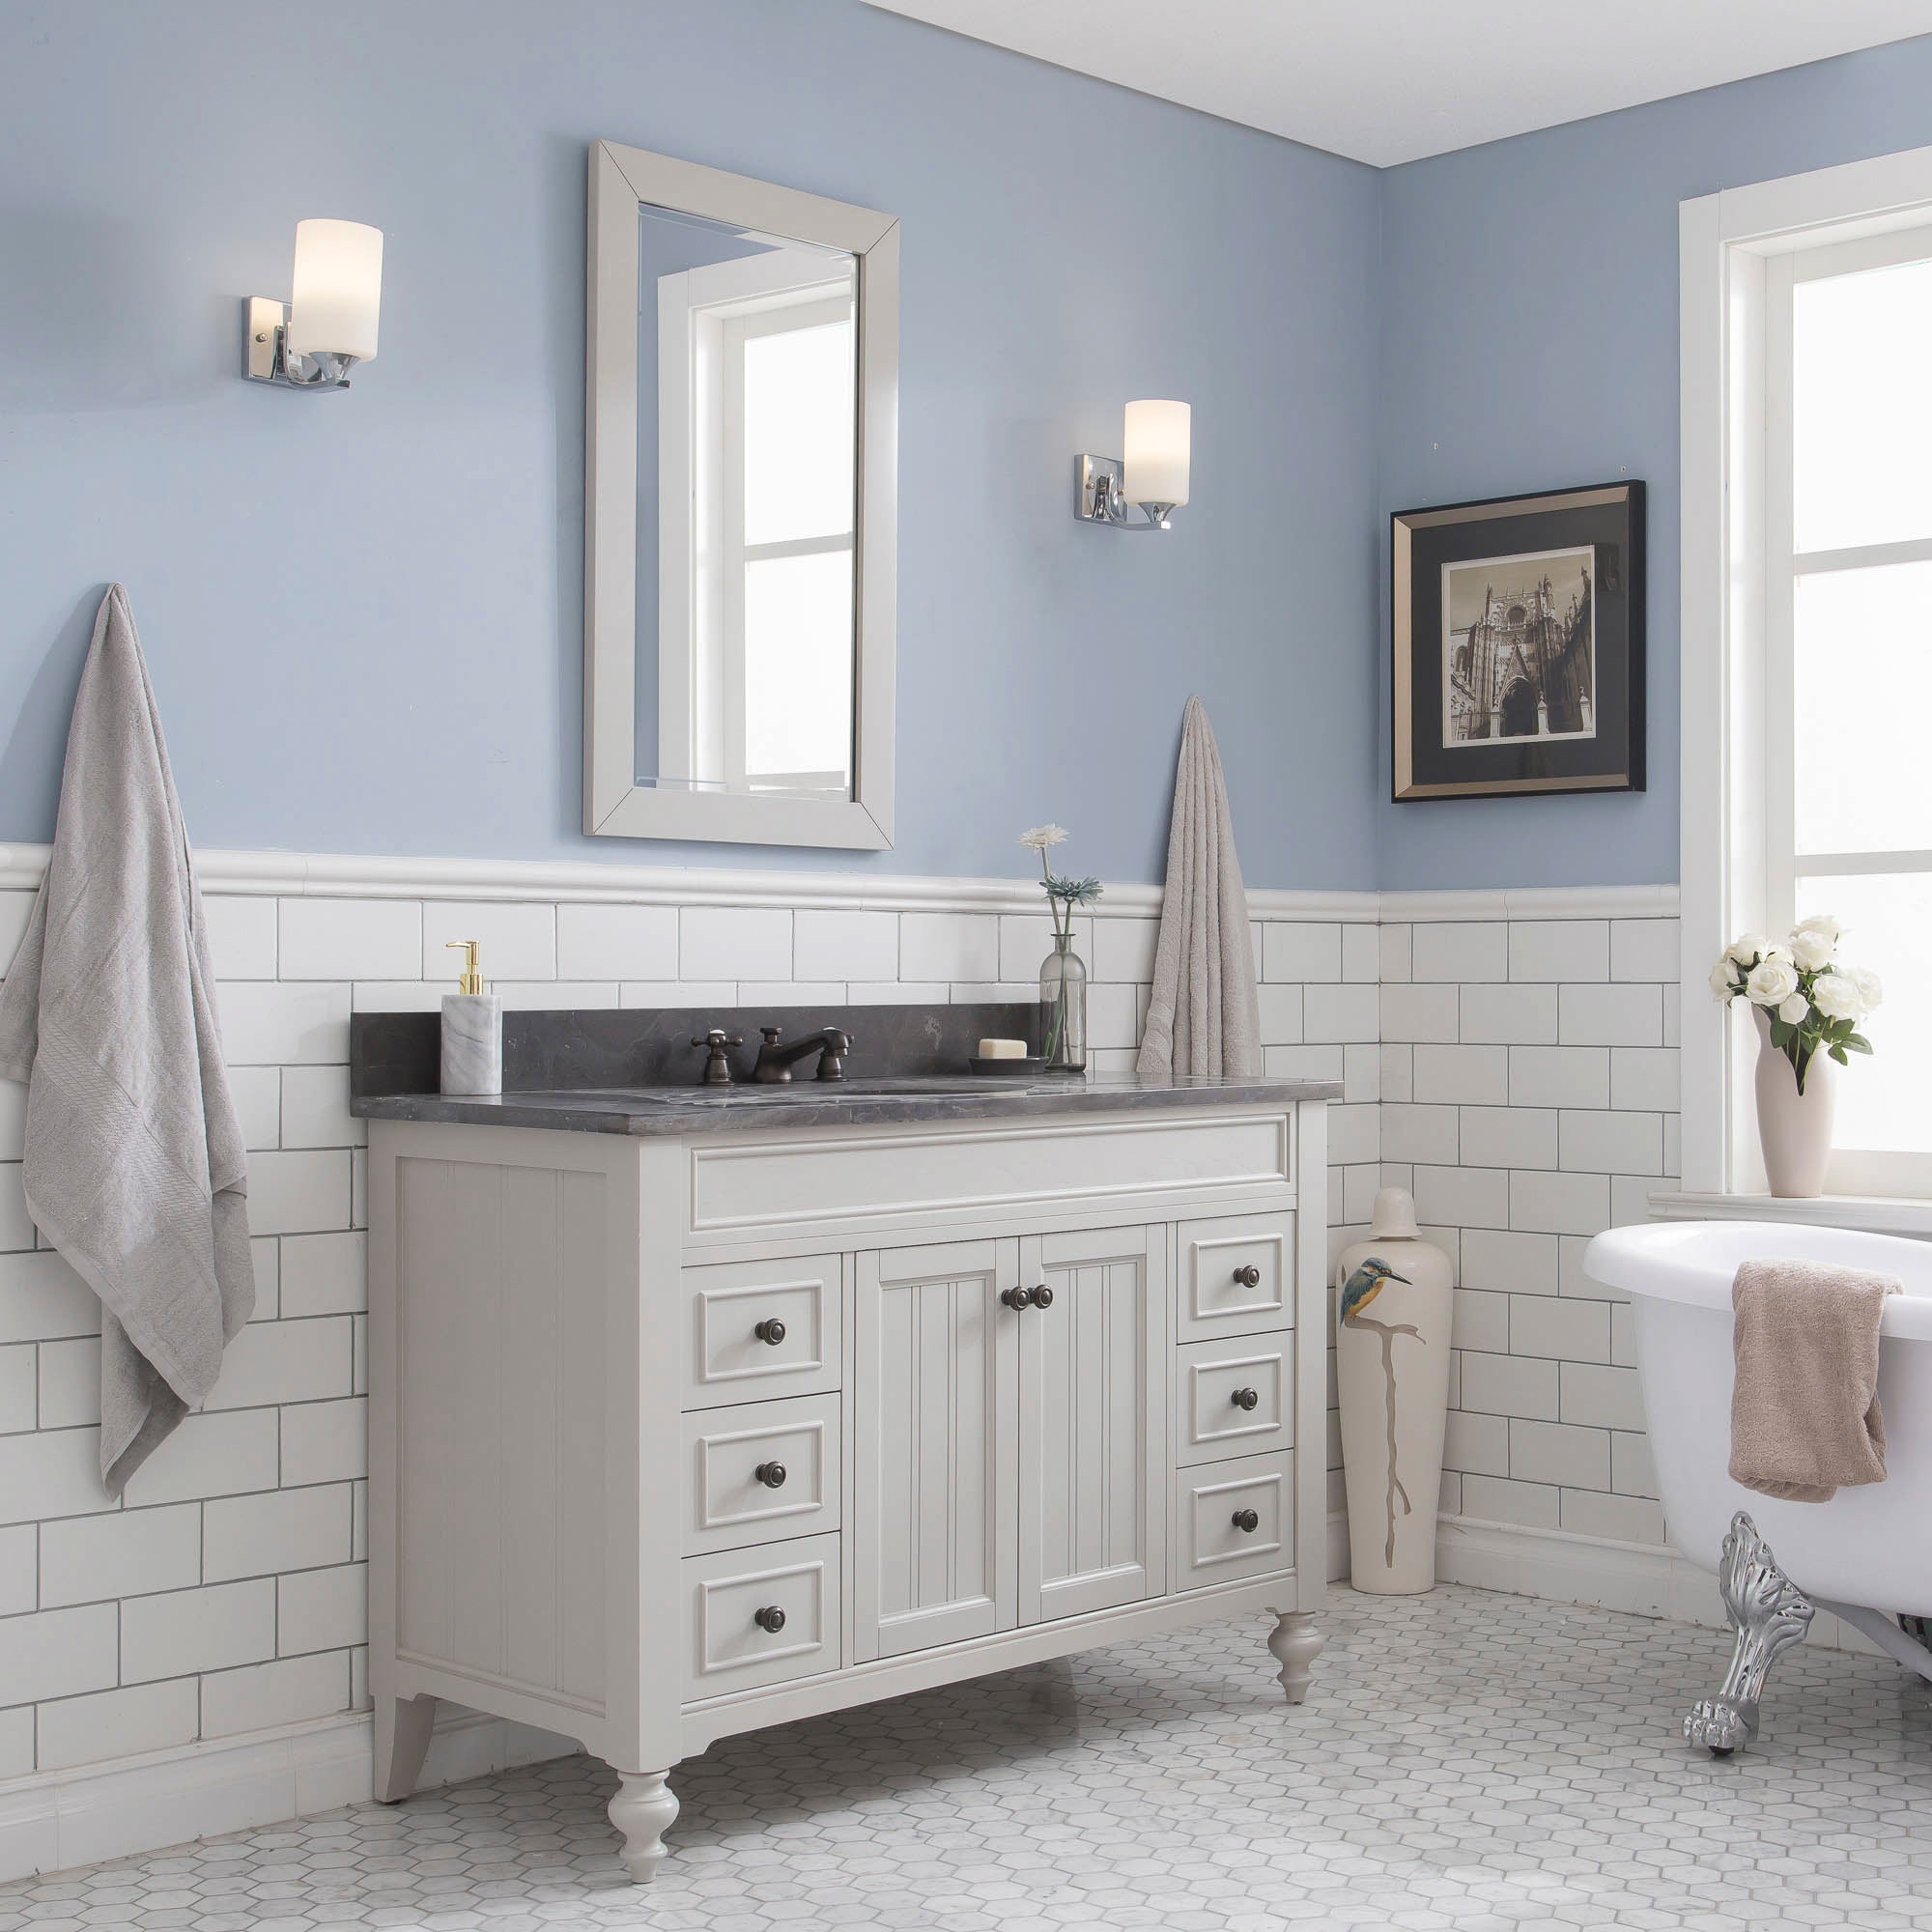 Water Creation | Potenza 48" Bathroom Vanity in Earl Grey with Blue Limestone Top with Faucet and Mirror | PO48BL03EG-R24BX0903